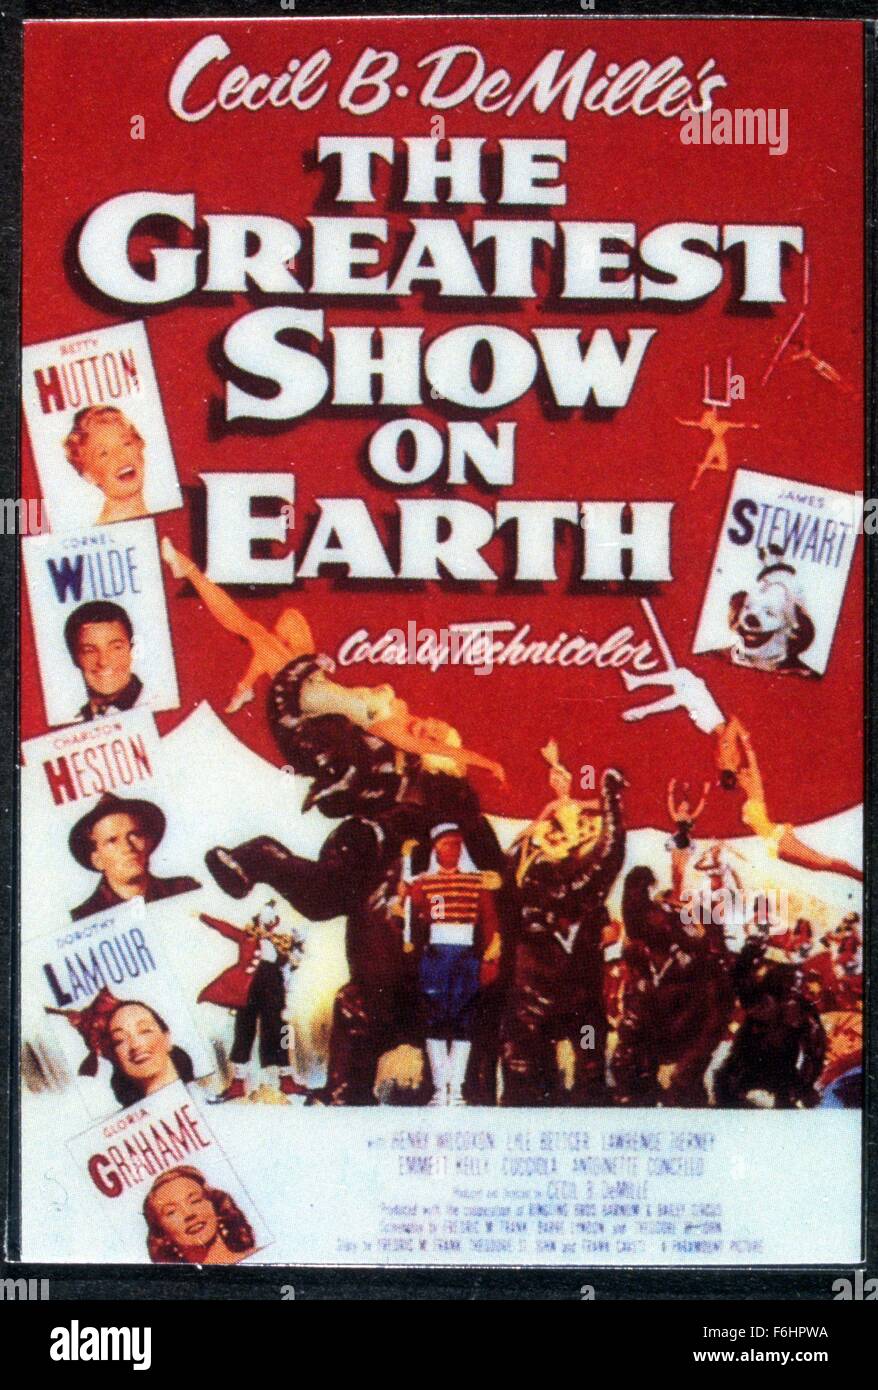 1952, Film Title: GREATEST SHOW ON EARTH, Director: CECIL B DeMILLE, Studio: PARAMOUNT, Pictured: 1952, AWARDS - ACADEMY, BEST PICTURE, CECIL B DeMILLE. (Credit Image: SNAP) Stock Photo